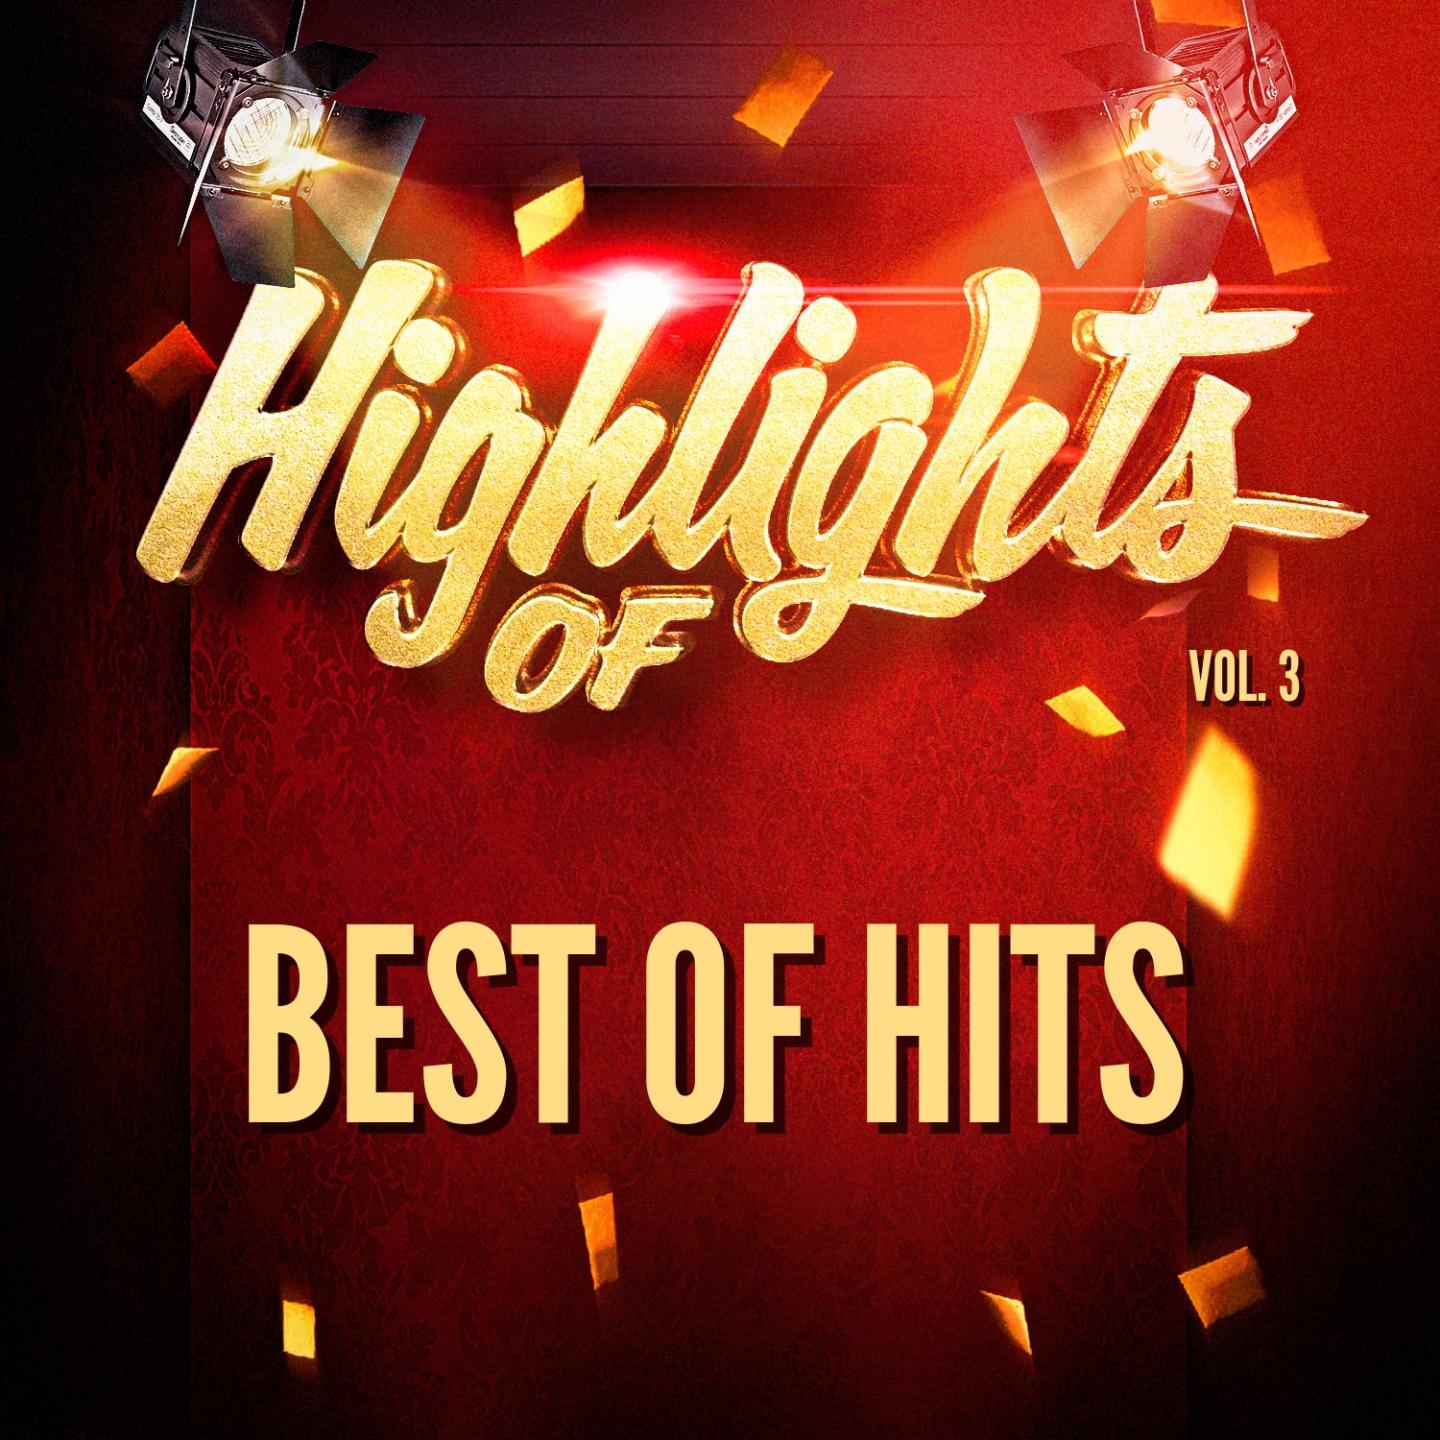 Highlights of Best of Hits, Vol. 3